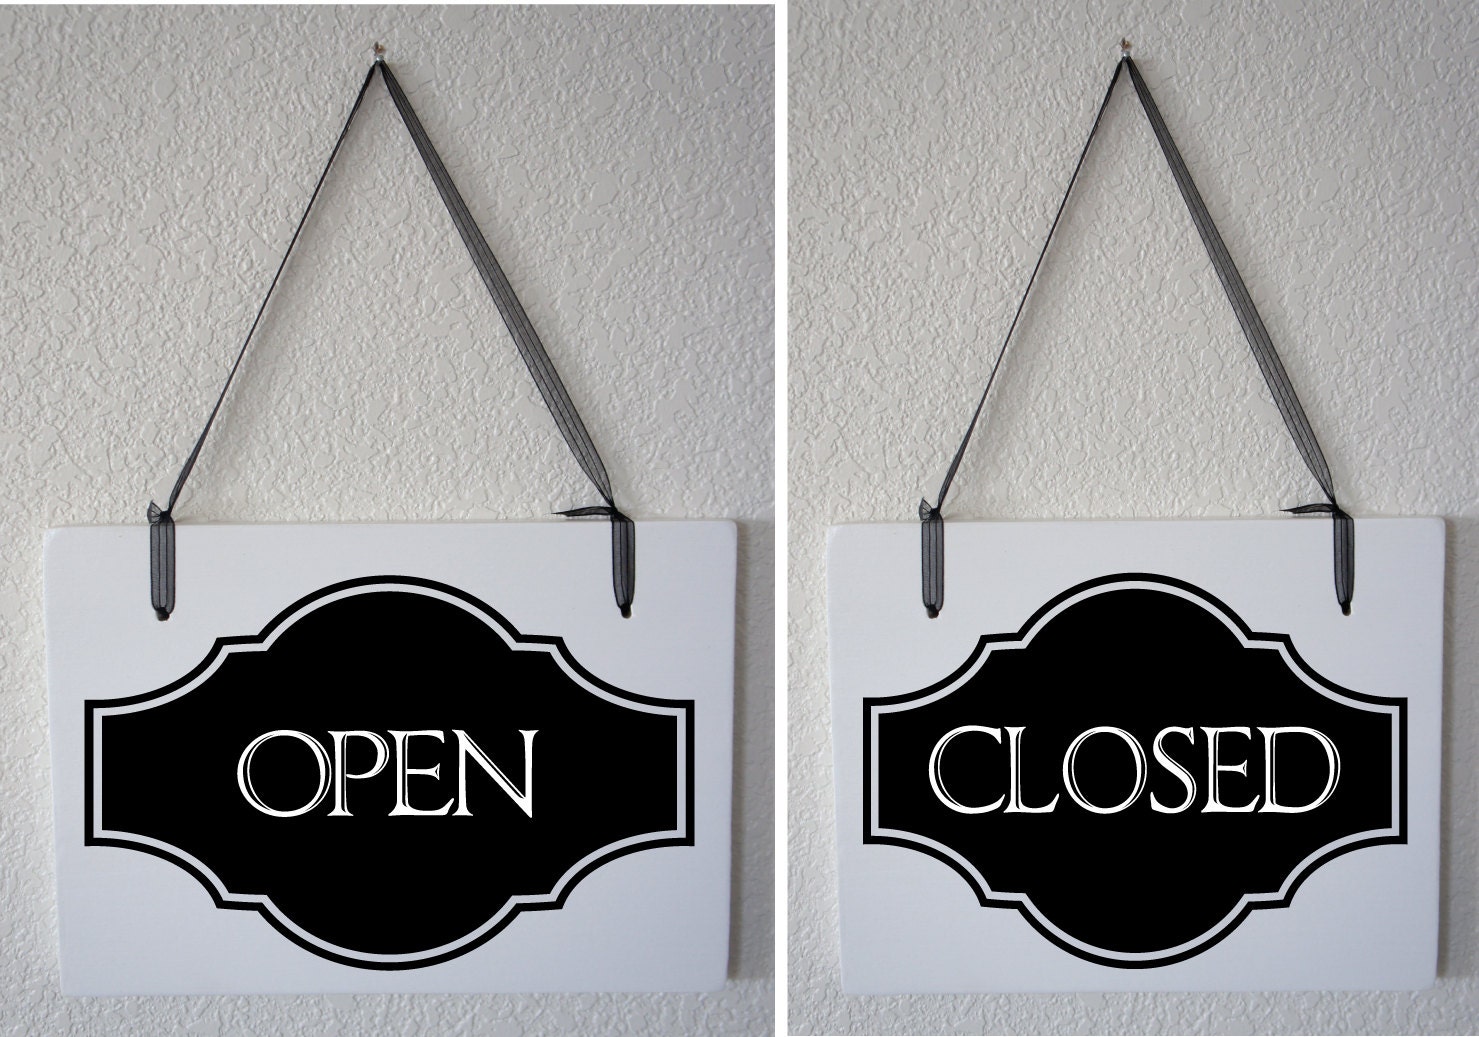 Business Closed Sign Template